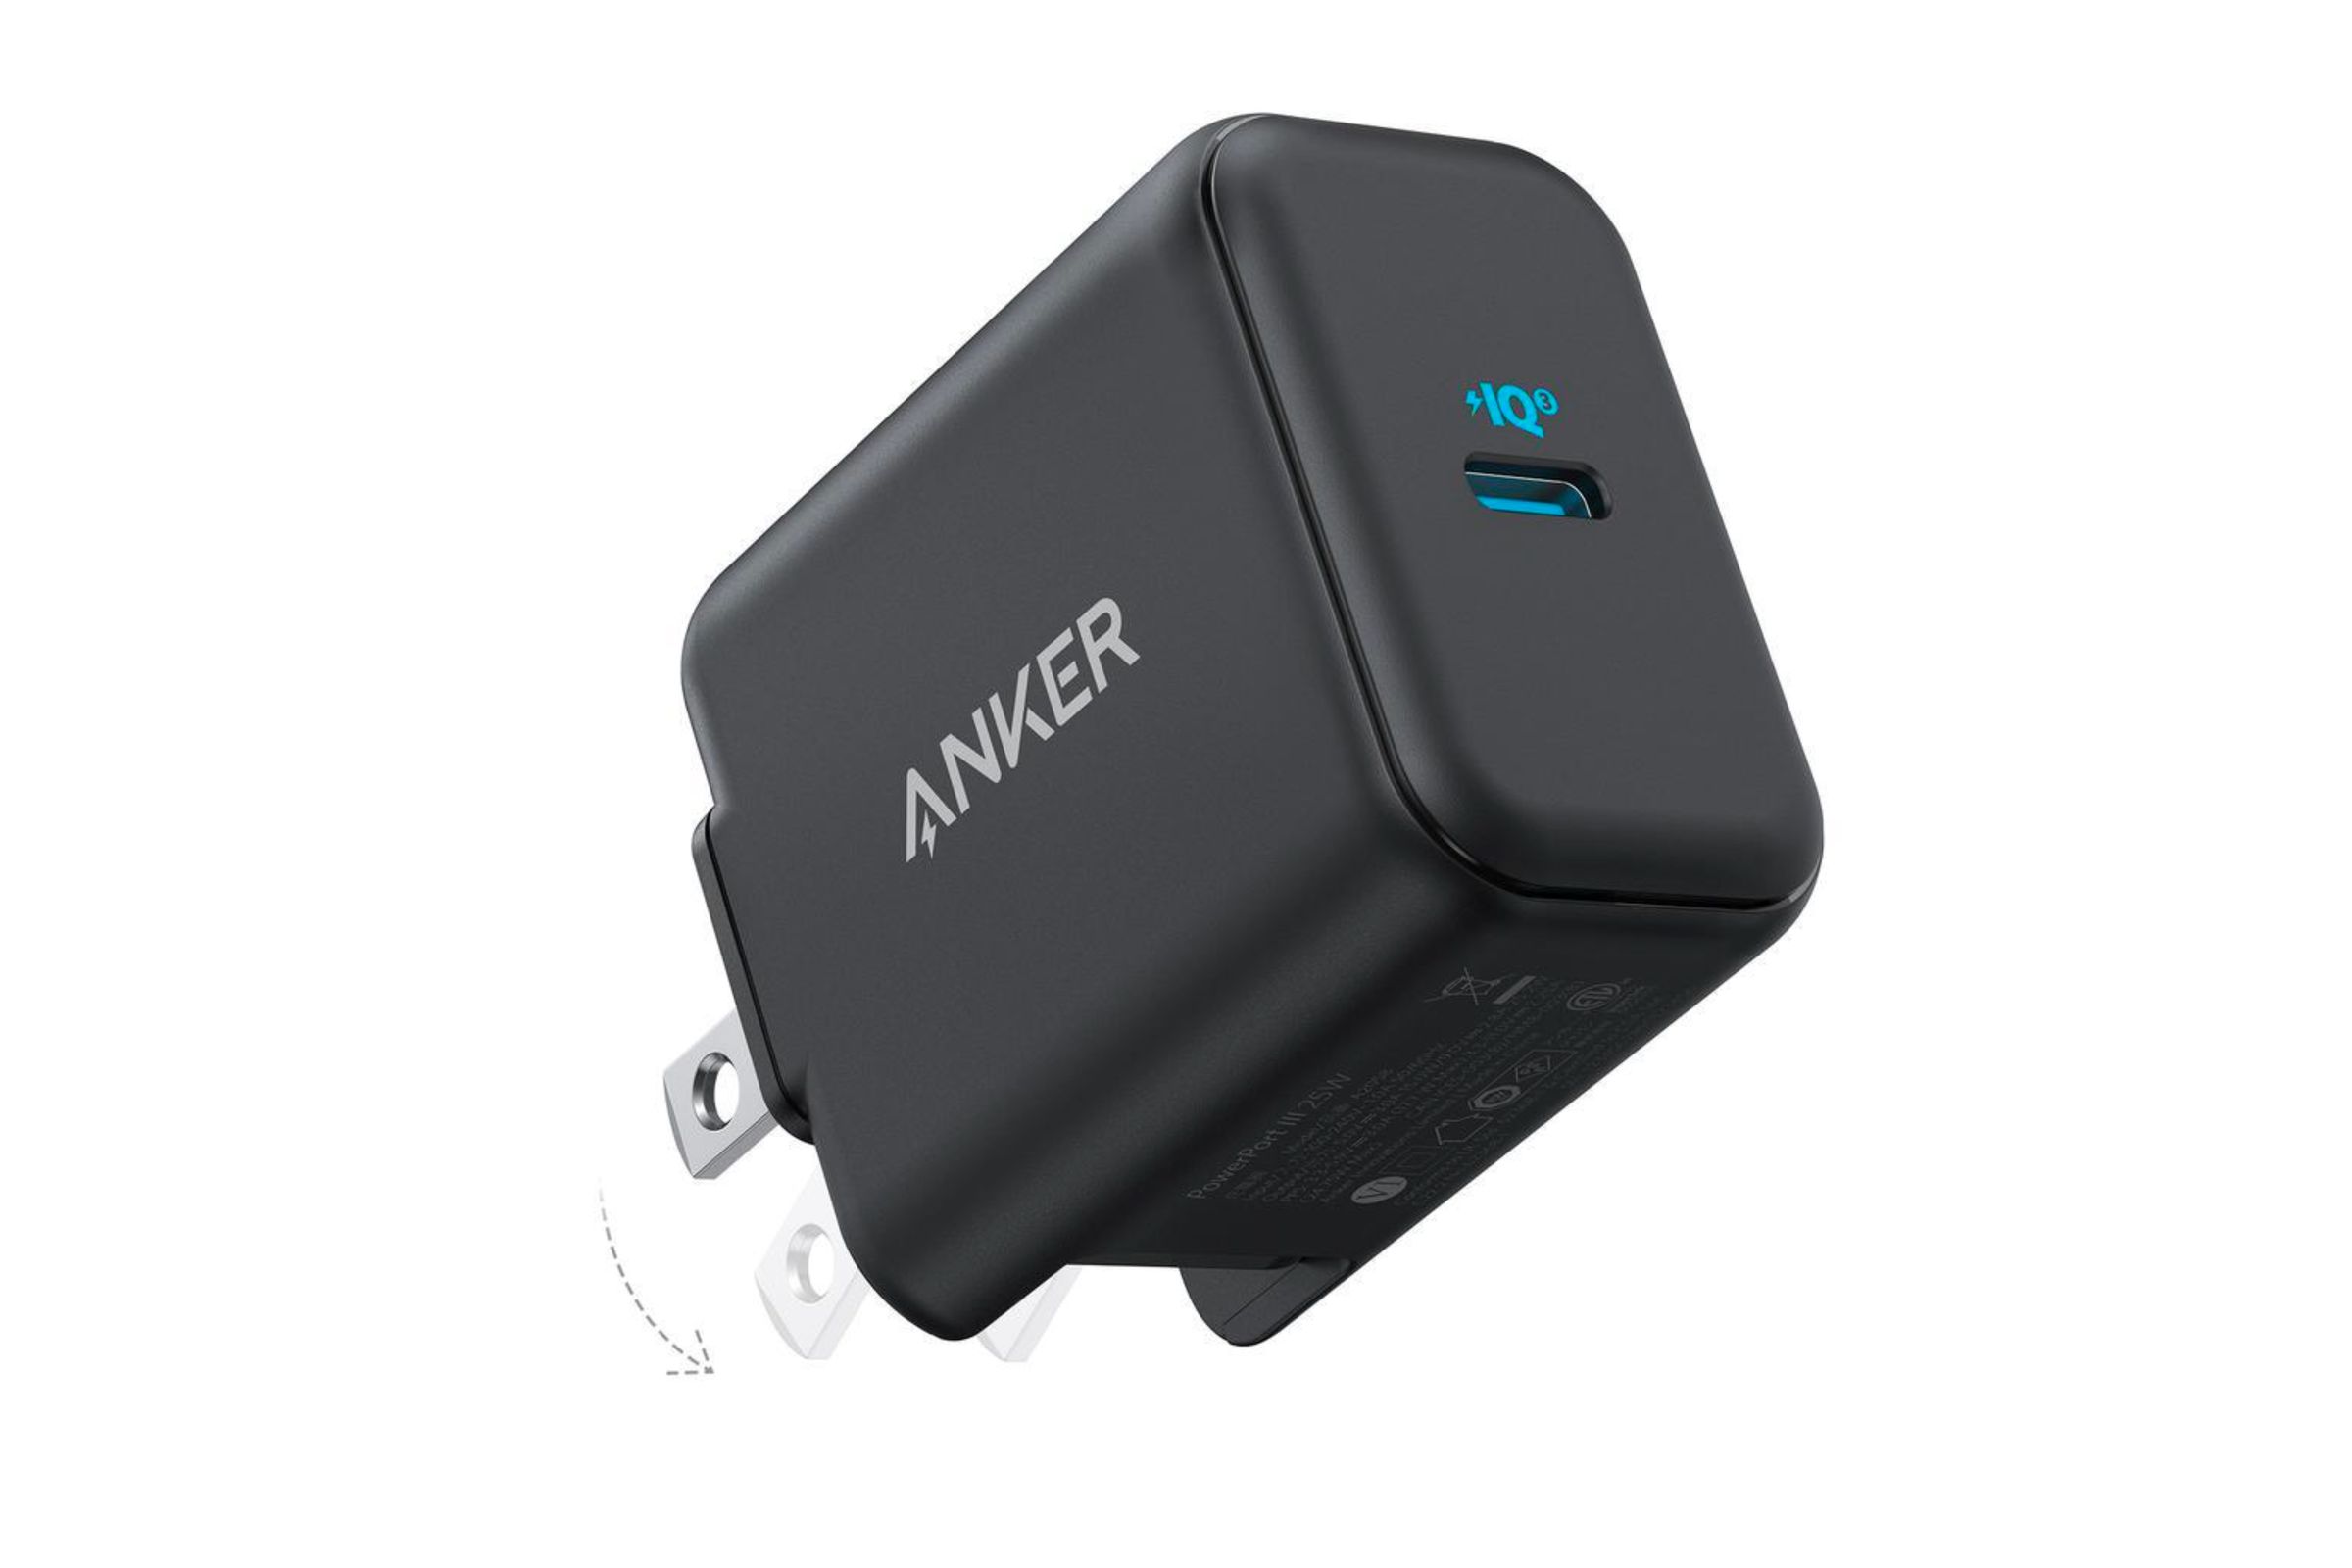 Anker 312 is a 25W USB-C charger with PPS support that’s largely used by Samsung devices and some laptops.